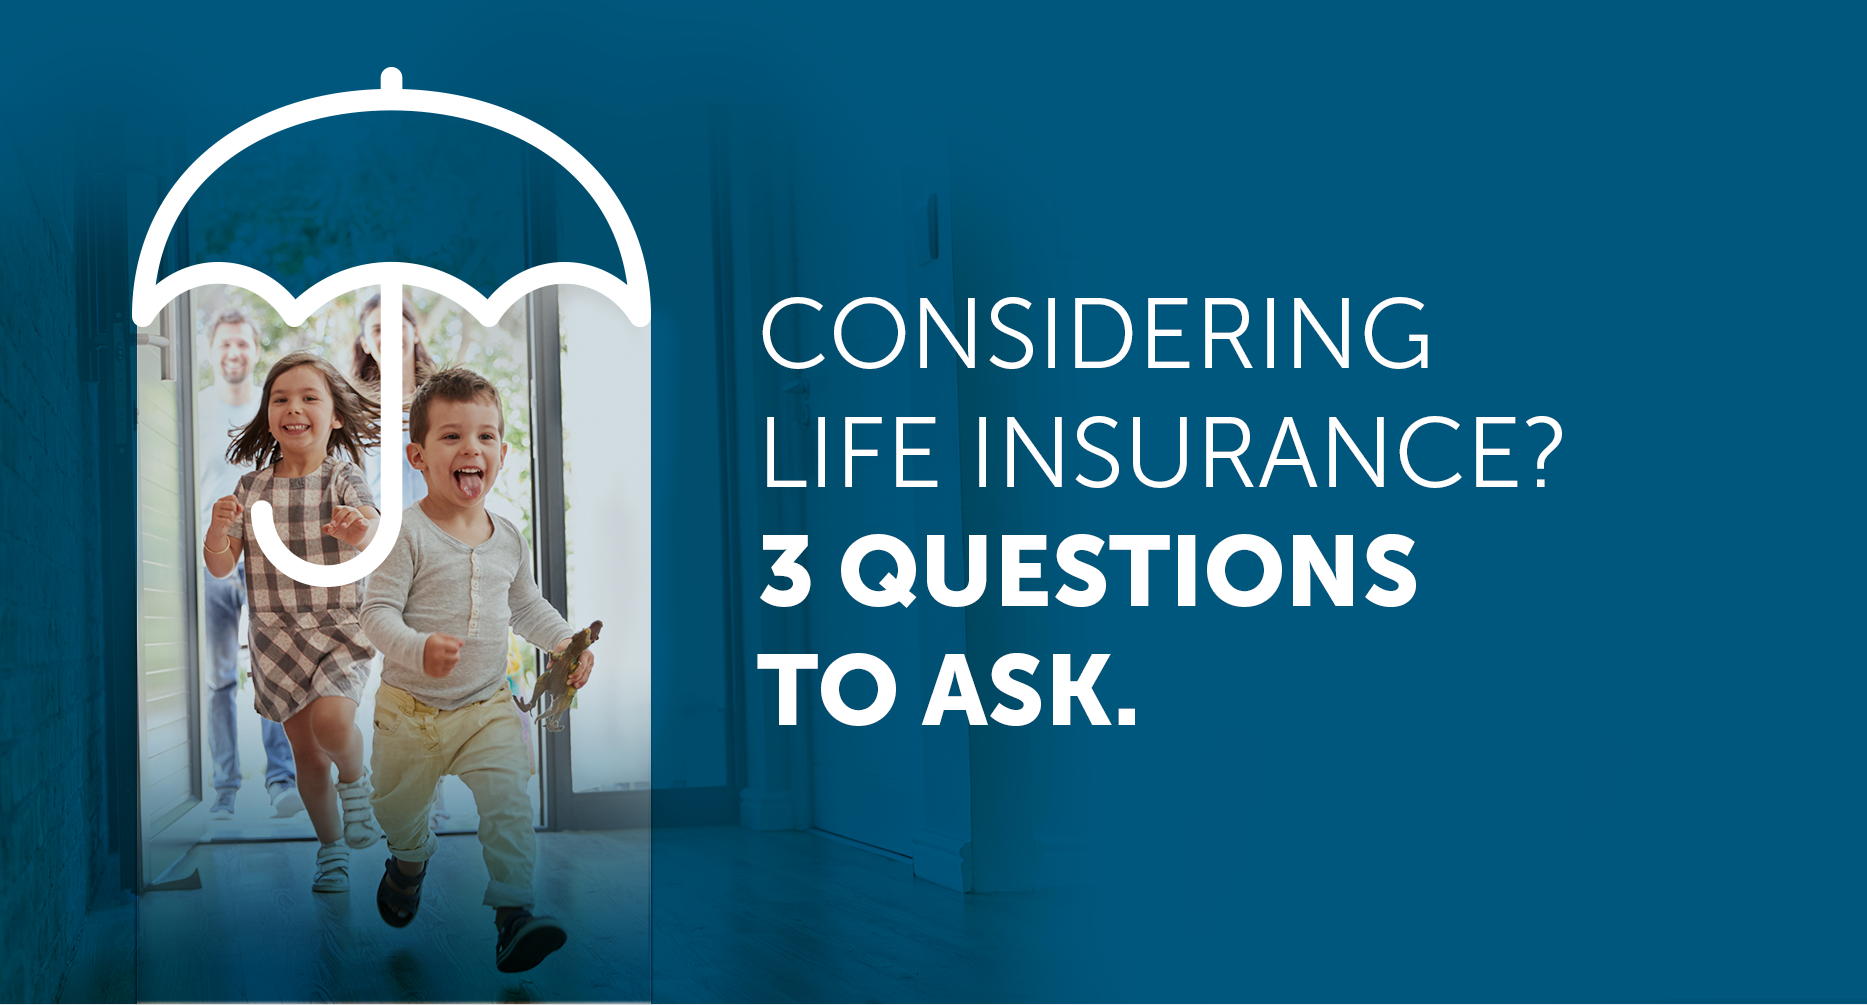 Considering life insurance? 3 questions to ask.